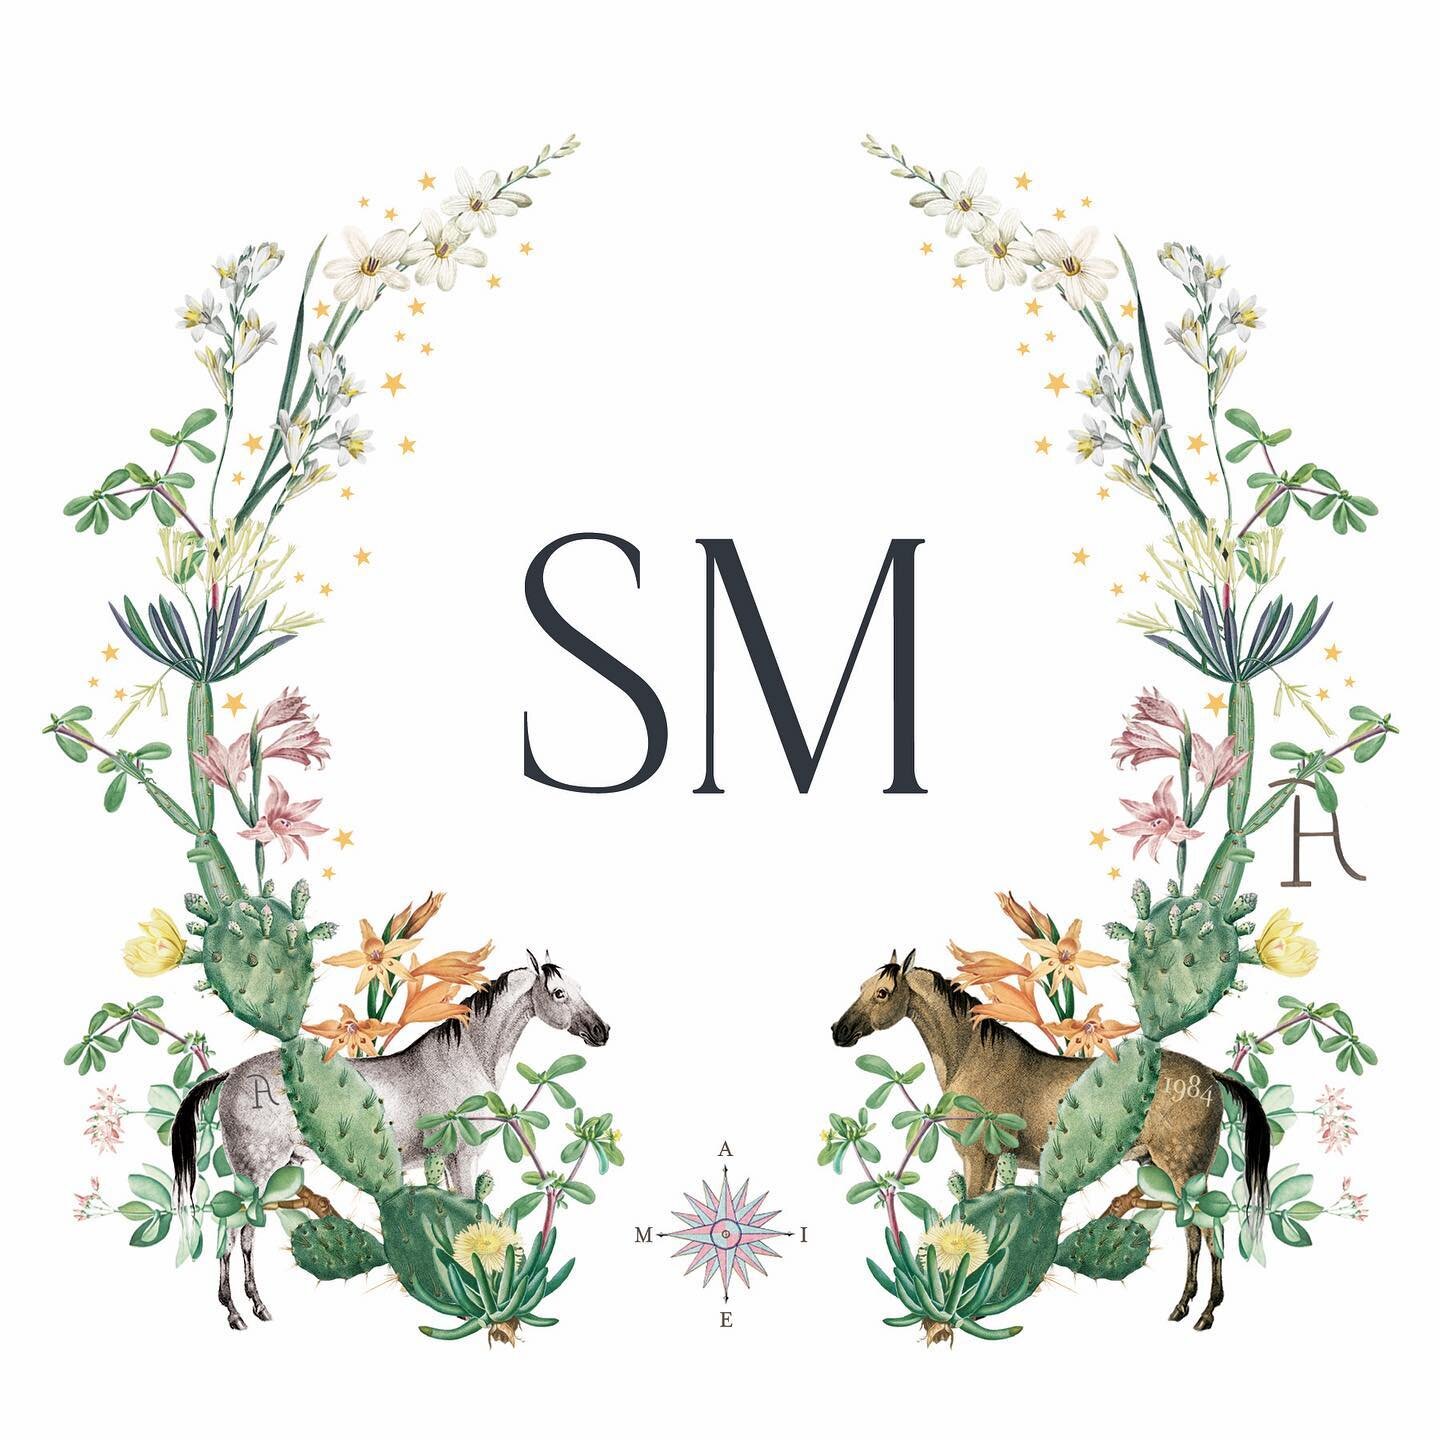 Crest design for a family features plants, animals, and motifs that reflects their ranch - a location special to them ✨🐎 A symbol reflecting each family member was also incorporated
-
Ranch flora (cacti, succulents), Ranch fauna (horses), Special sy